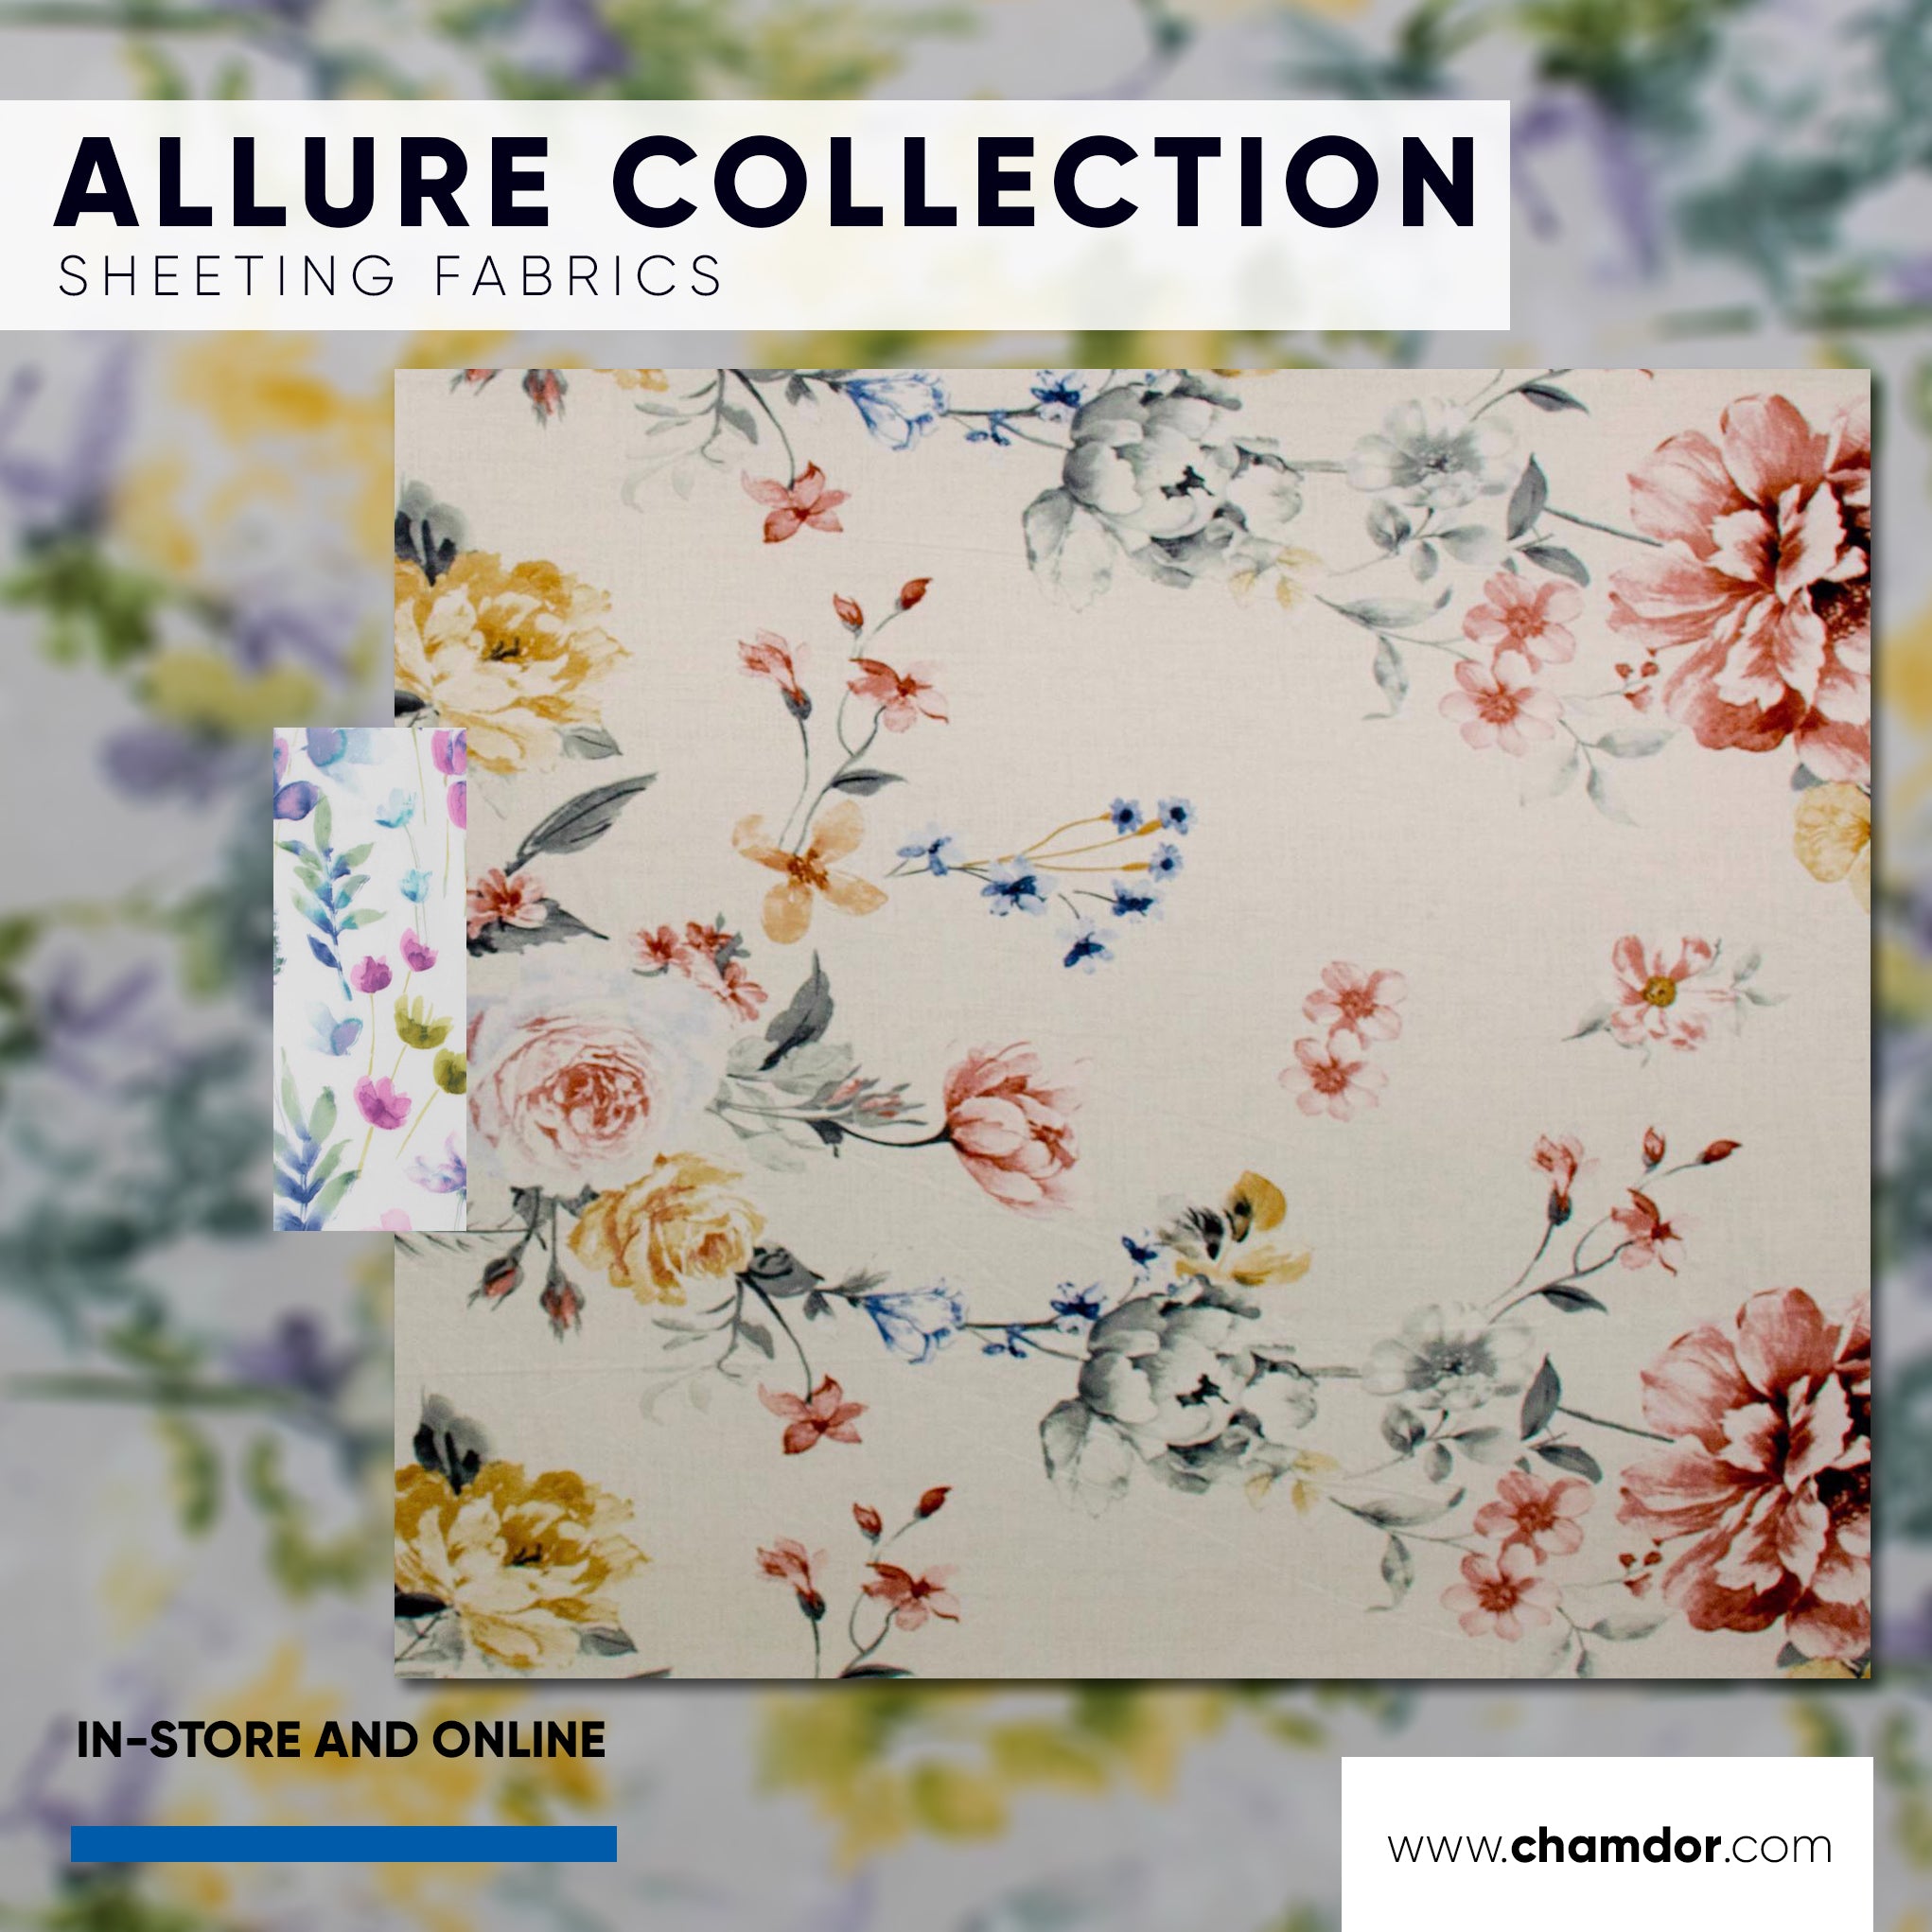 Allure Collection